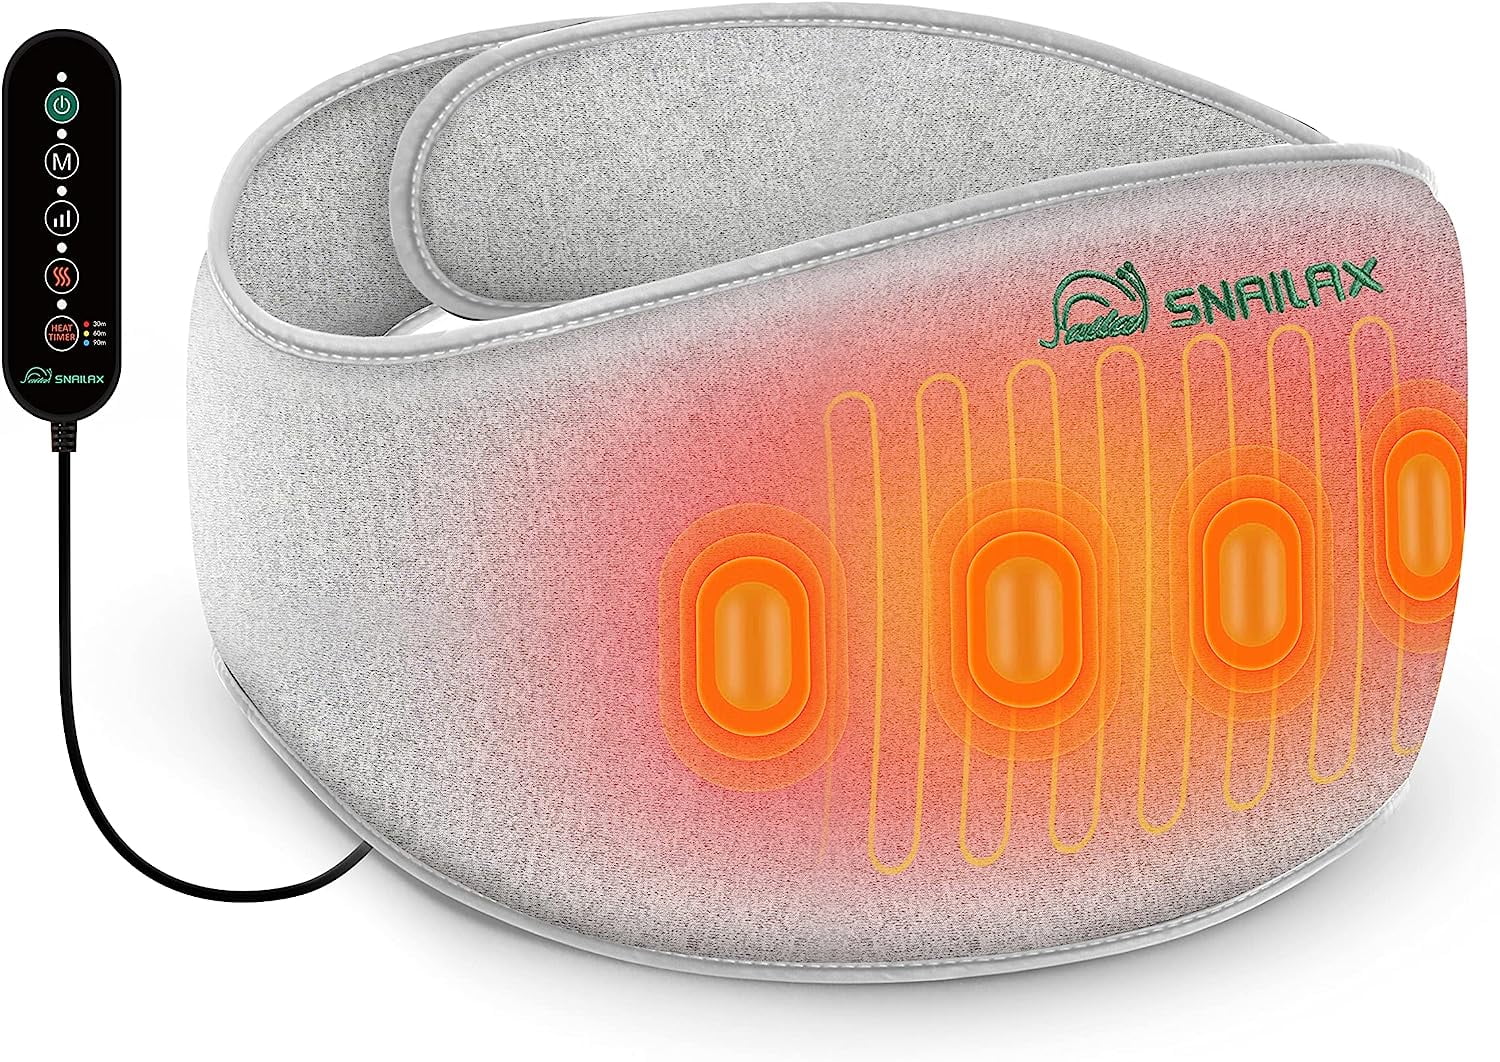 Snailax Heated Neck and Shoulder Massager, Electric Heating Pad for Back  Pain Relief, Heat Wrap with Adjustable Levels & Vibration Massage, Gifts 